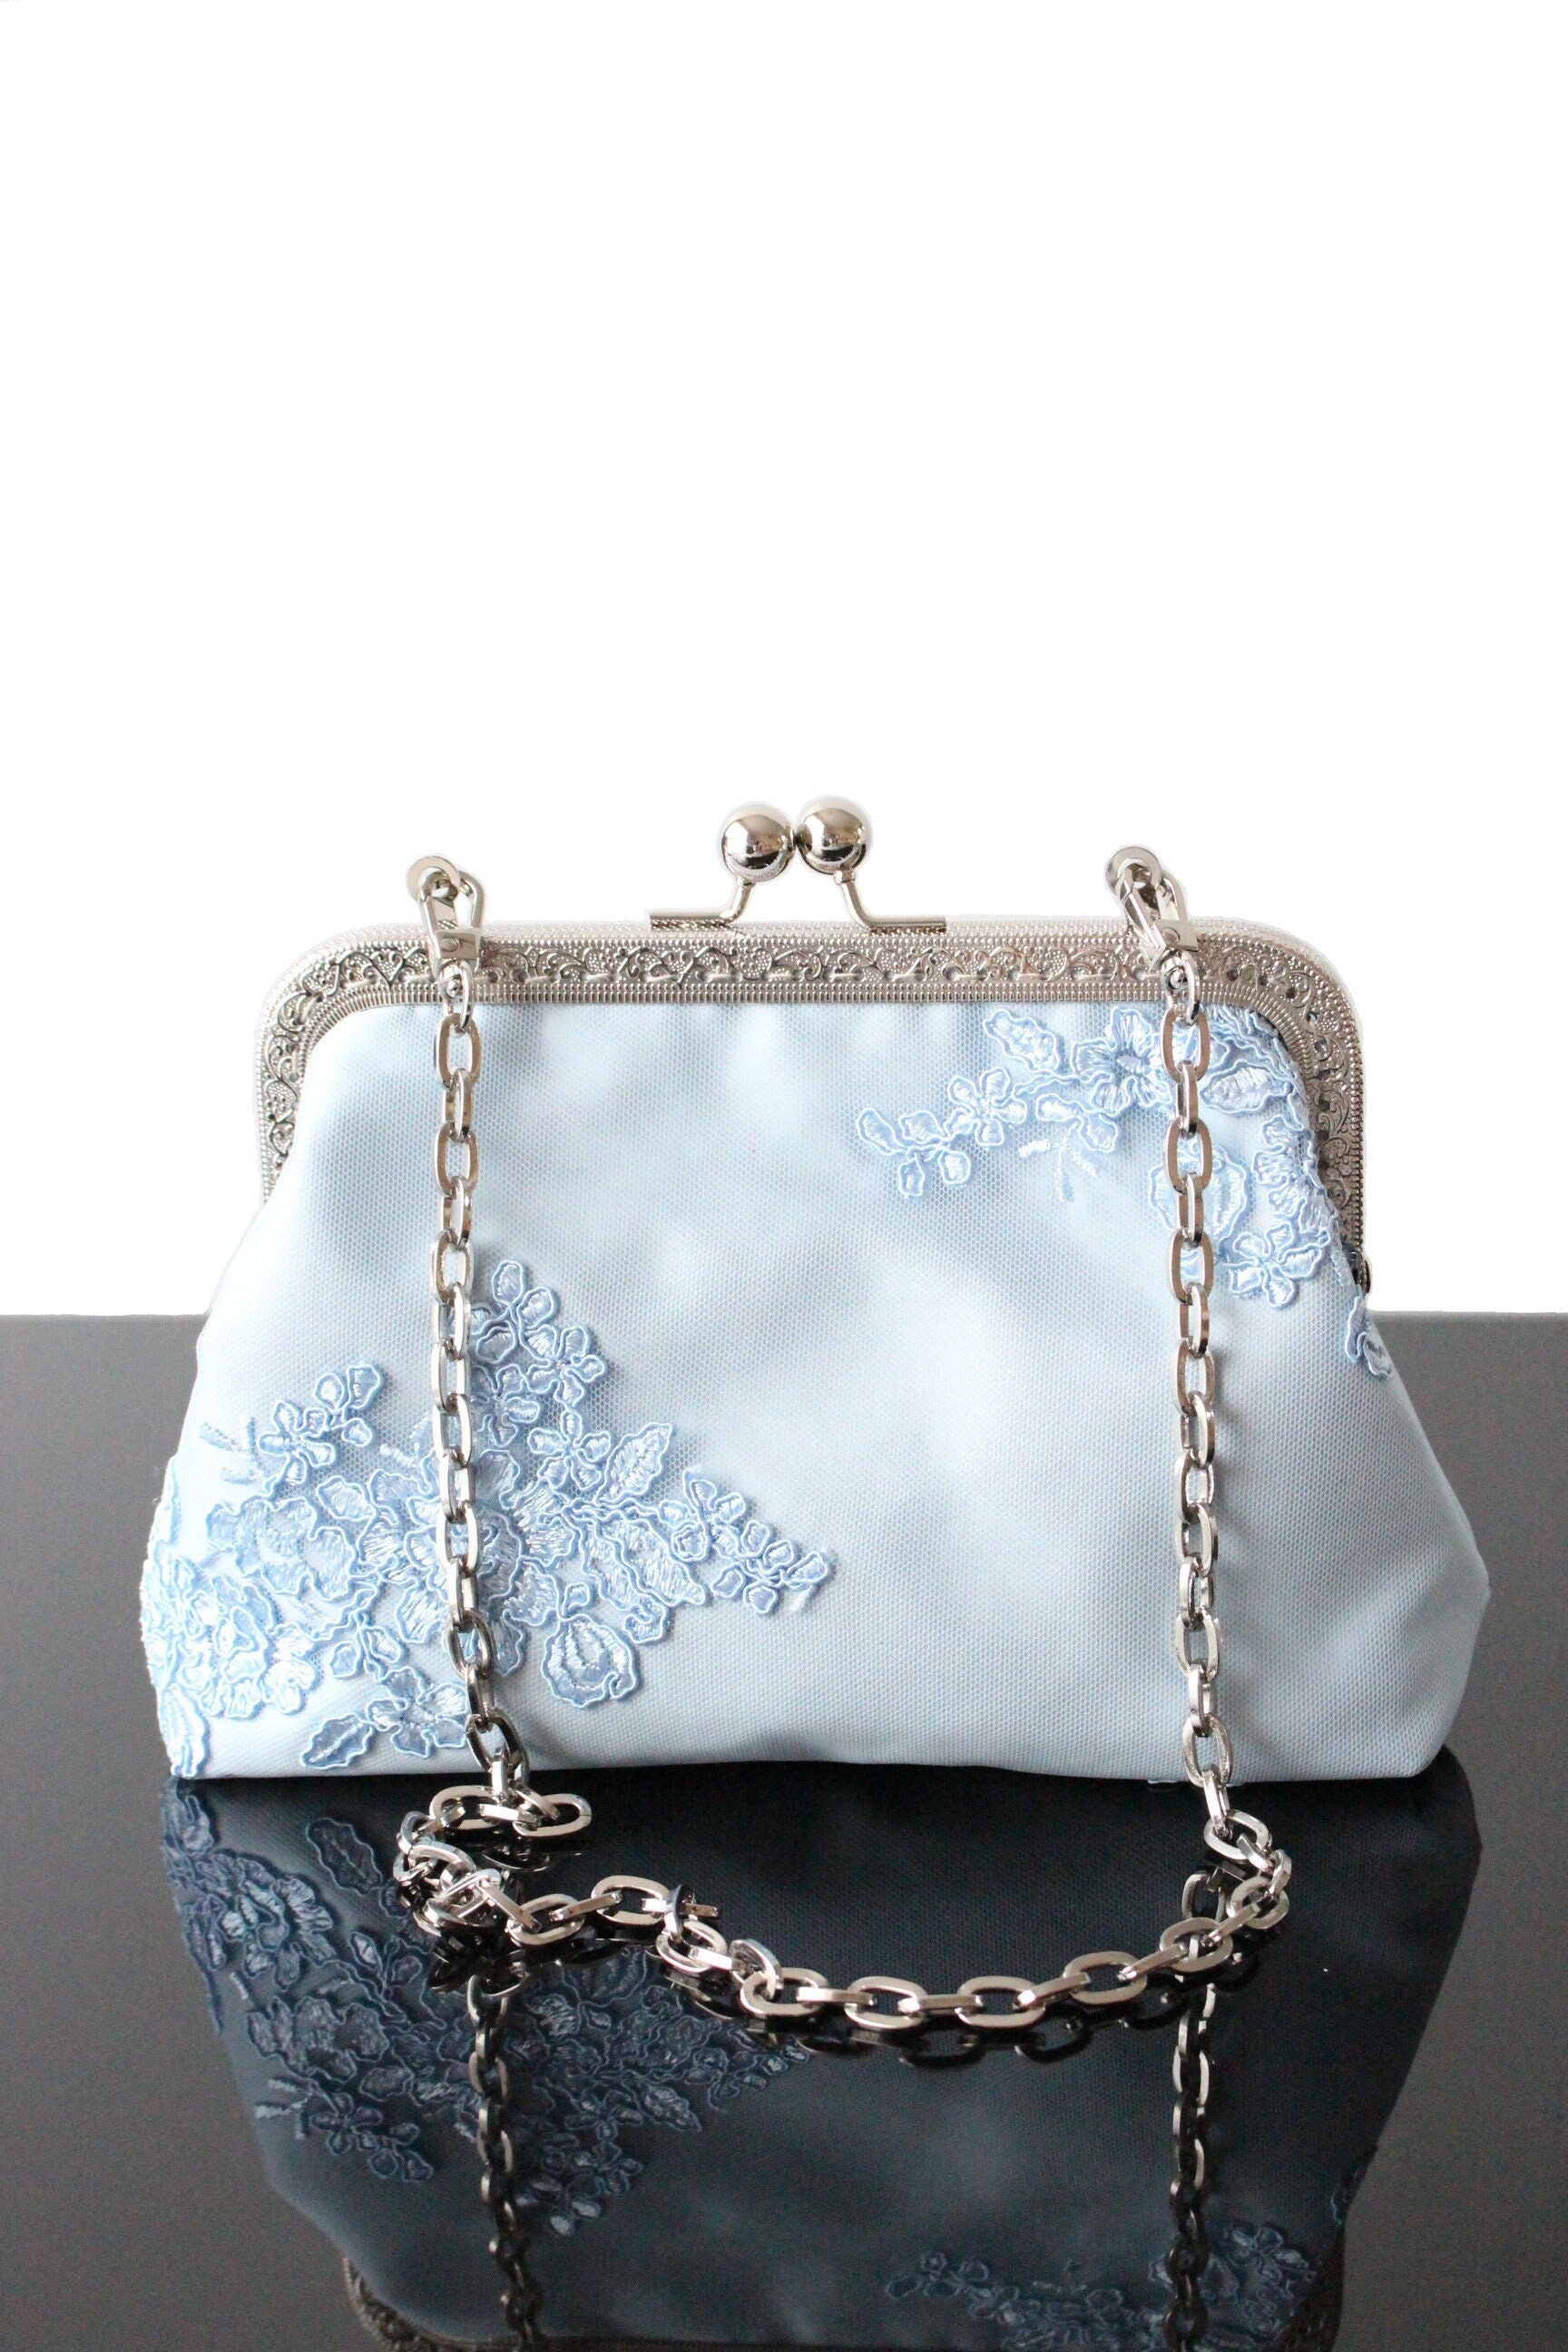 Baby Blue Wedding Clutch Bag With Silver Hardware Kisslock Light Blue Lace  Fabric Purse Luxury Gift for Bridal Day - Etsy